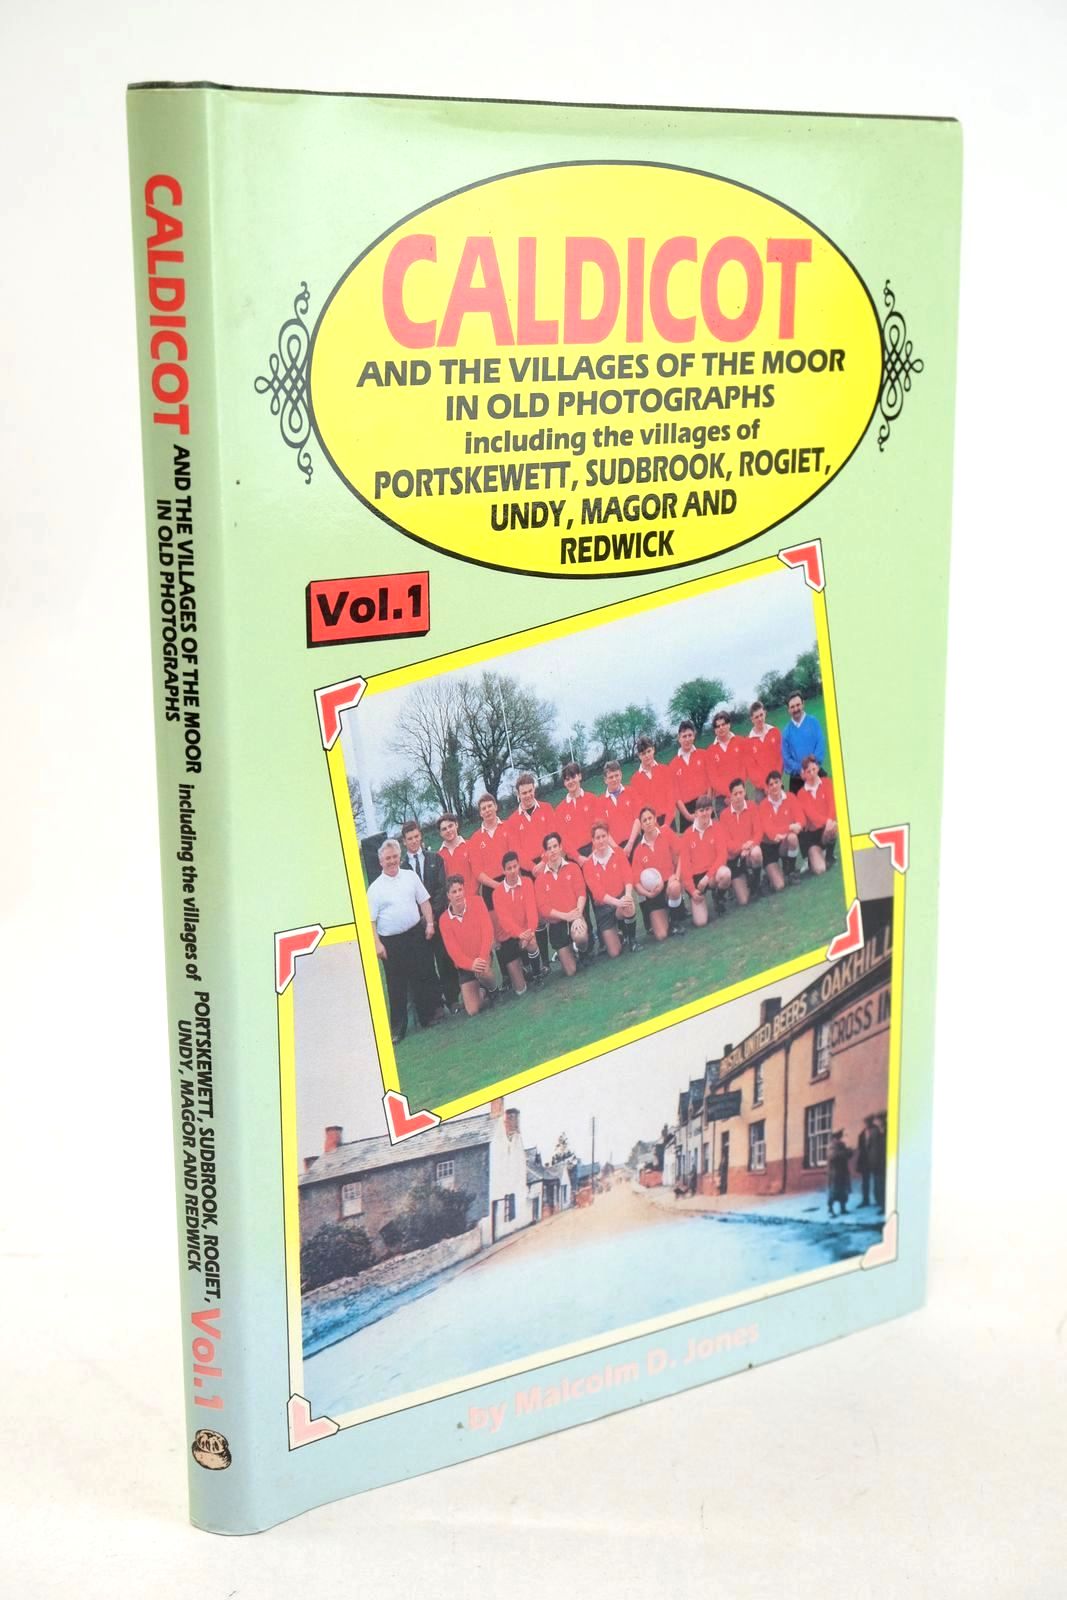 Photo of CALDICOT AND THE VILLAGES OF THE MOOR IN OLD PHOTOGRAPHS VOLUME 1 written by Jones, Malcolm D. published by Old Bakehouse Publications (STOCK CODE: 1327169)  for sale by Stella & Rose's Books